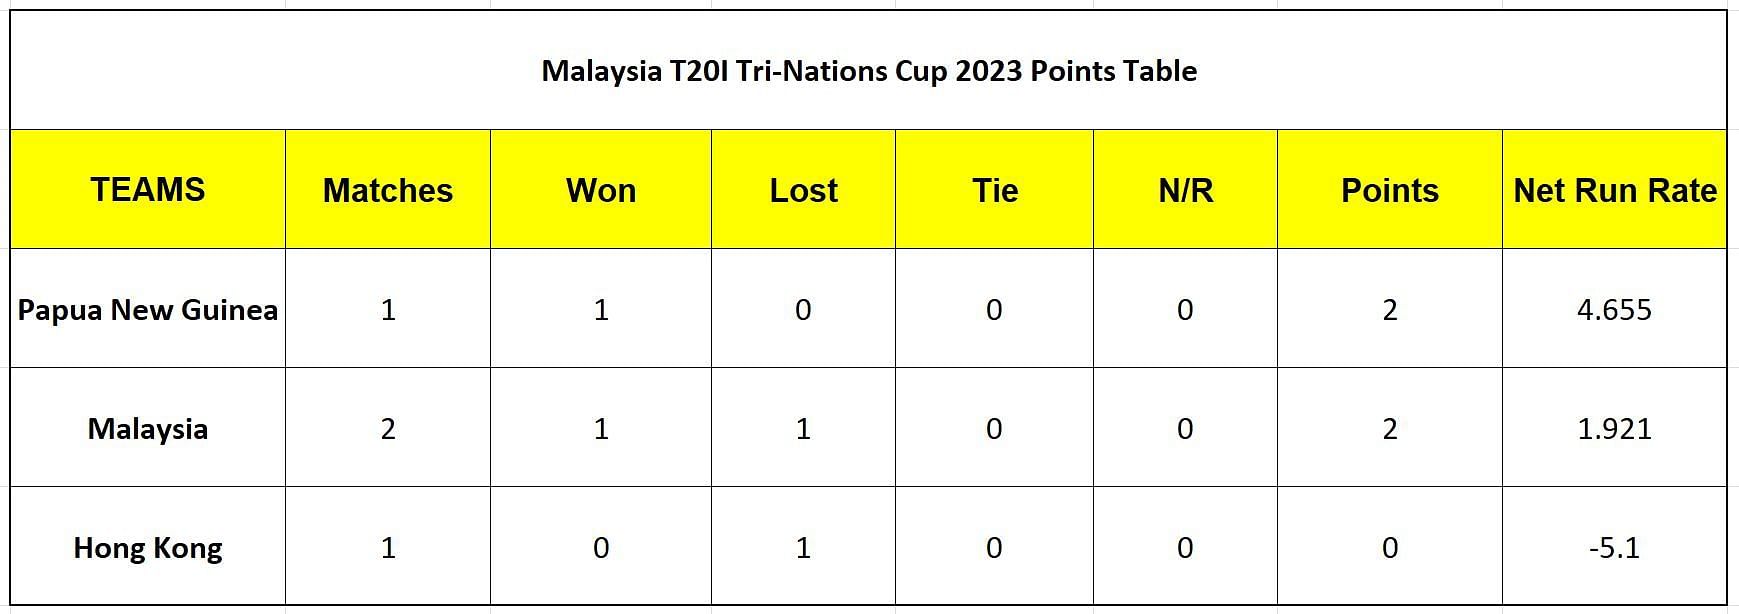 Malaysia T20I Tri-Nations Cup 2023 Points Table